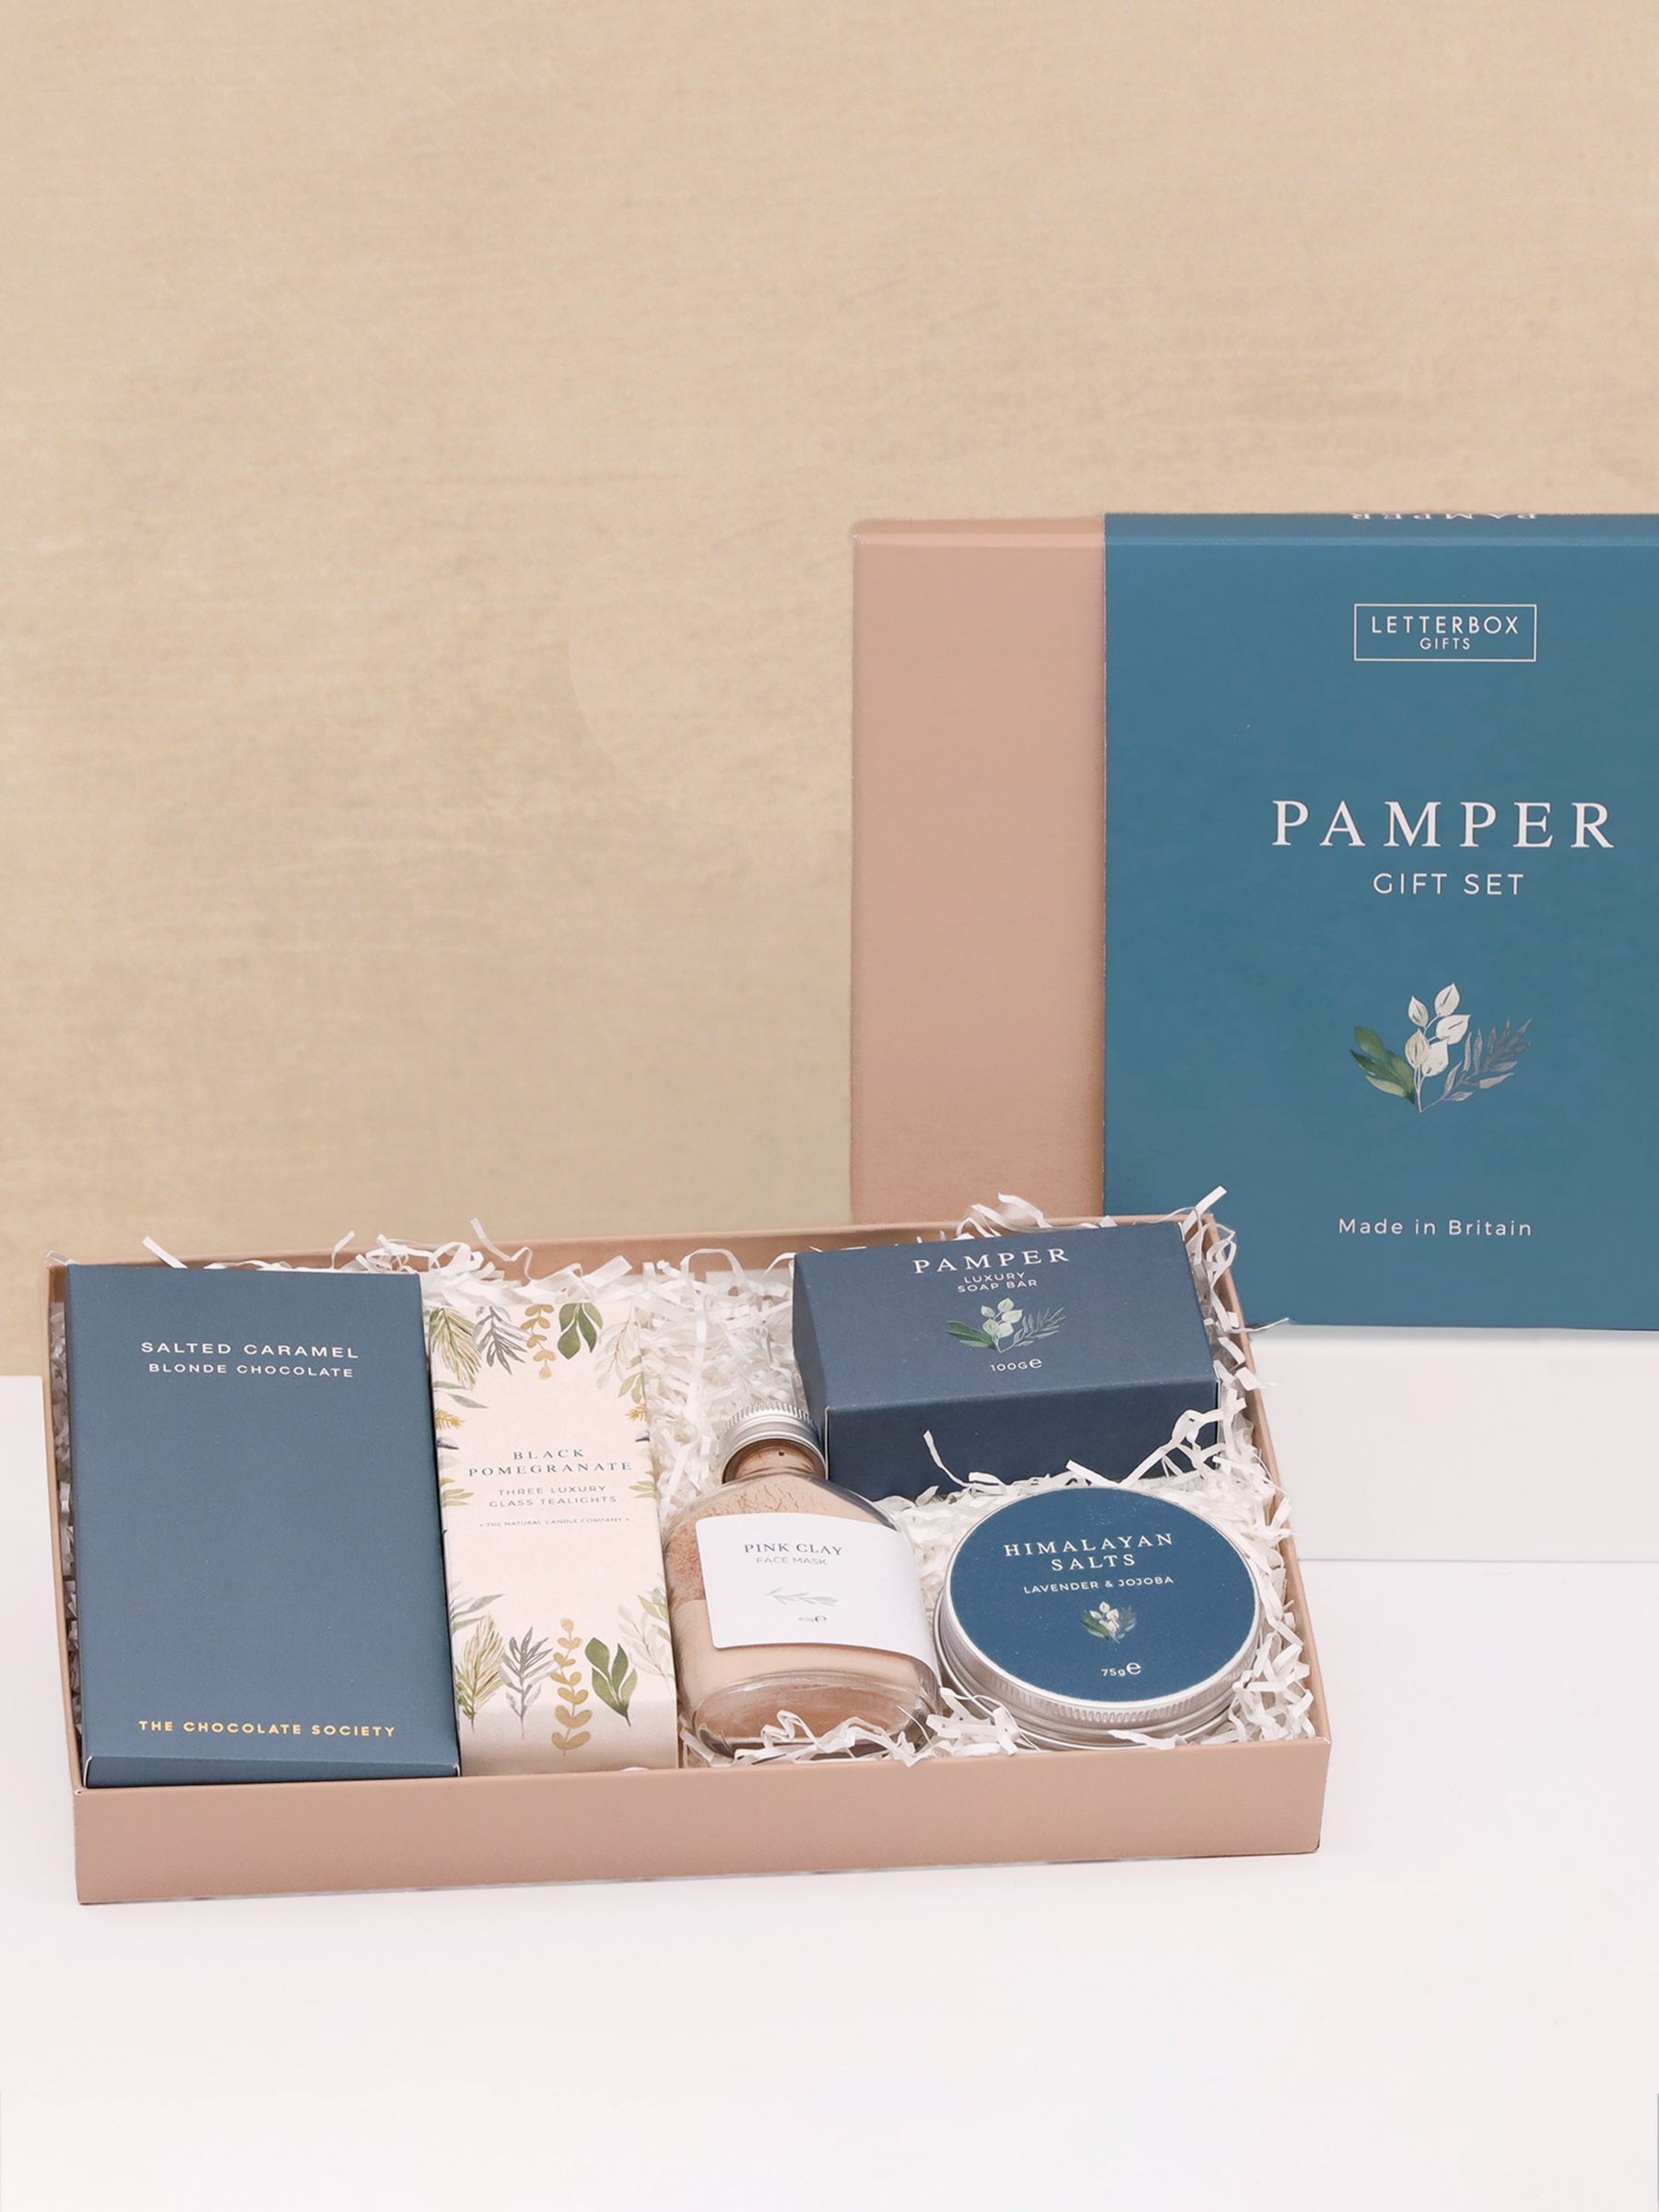 Letterbox Gifts Pamper Gift Set 5